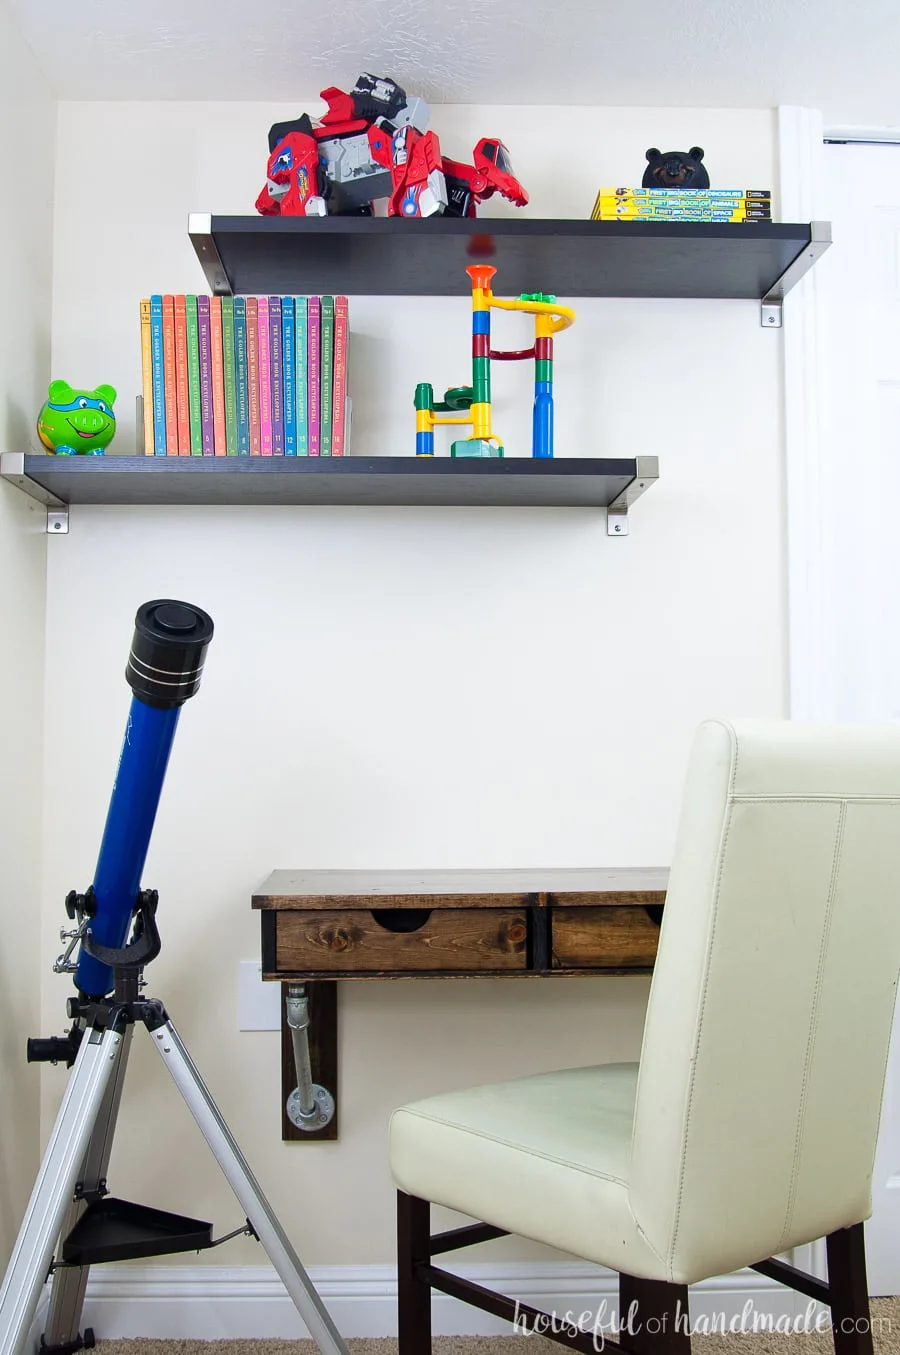 Wall mounted rustic desk in a boys bedroom. Shelves above hold encyclopedias and toys. Telescope sitting next to the desk.